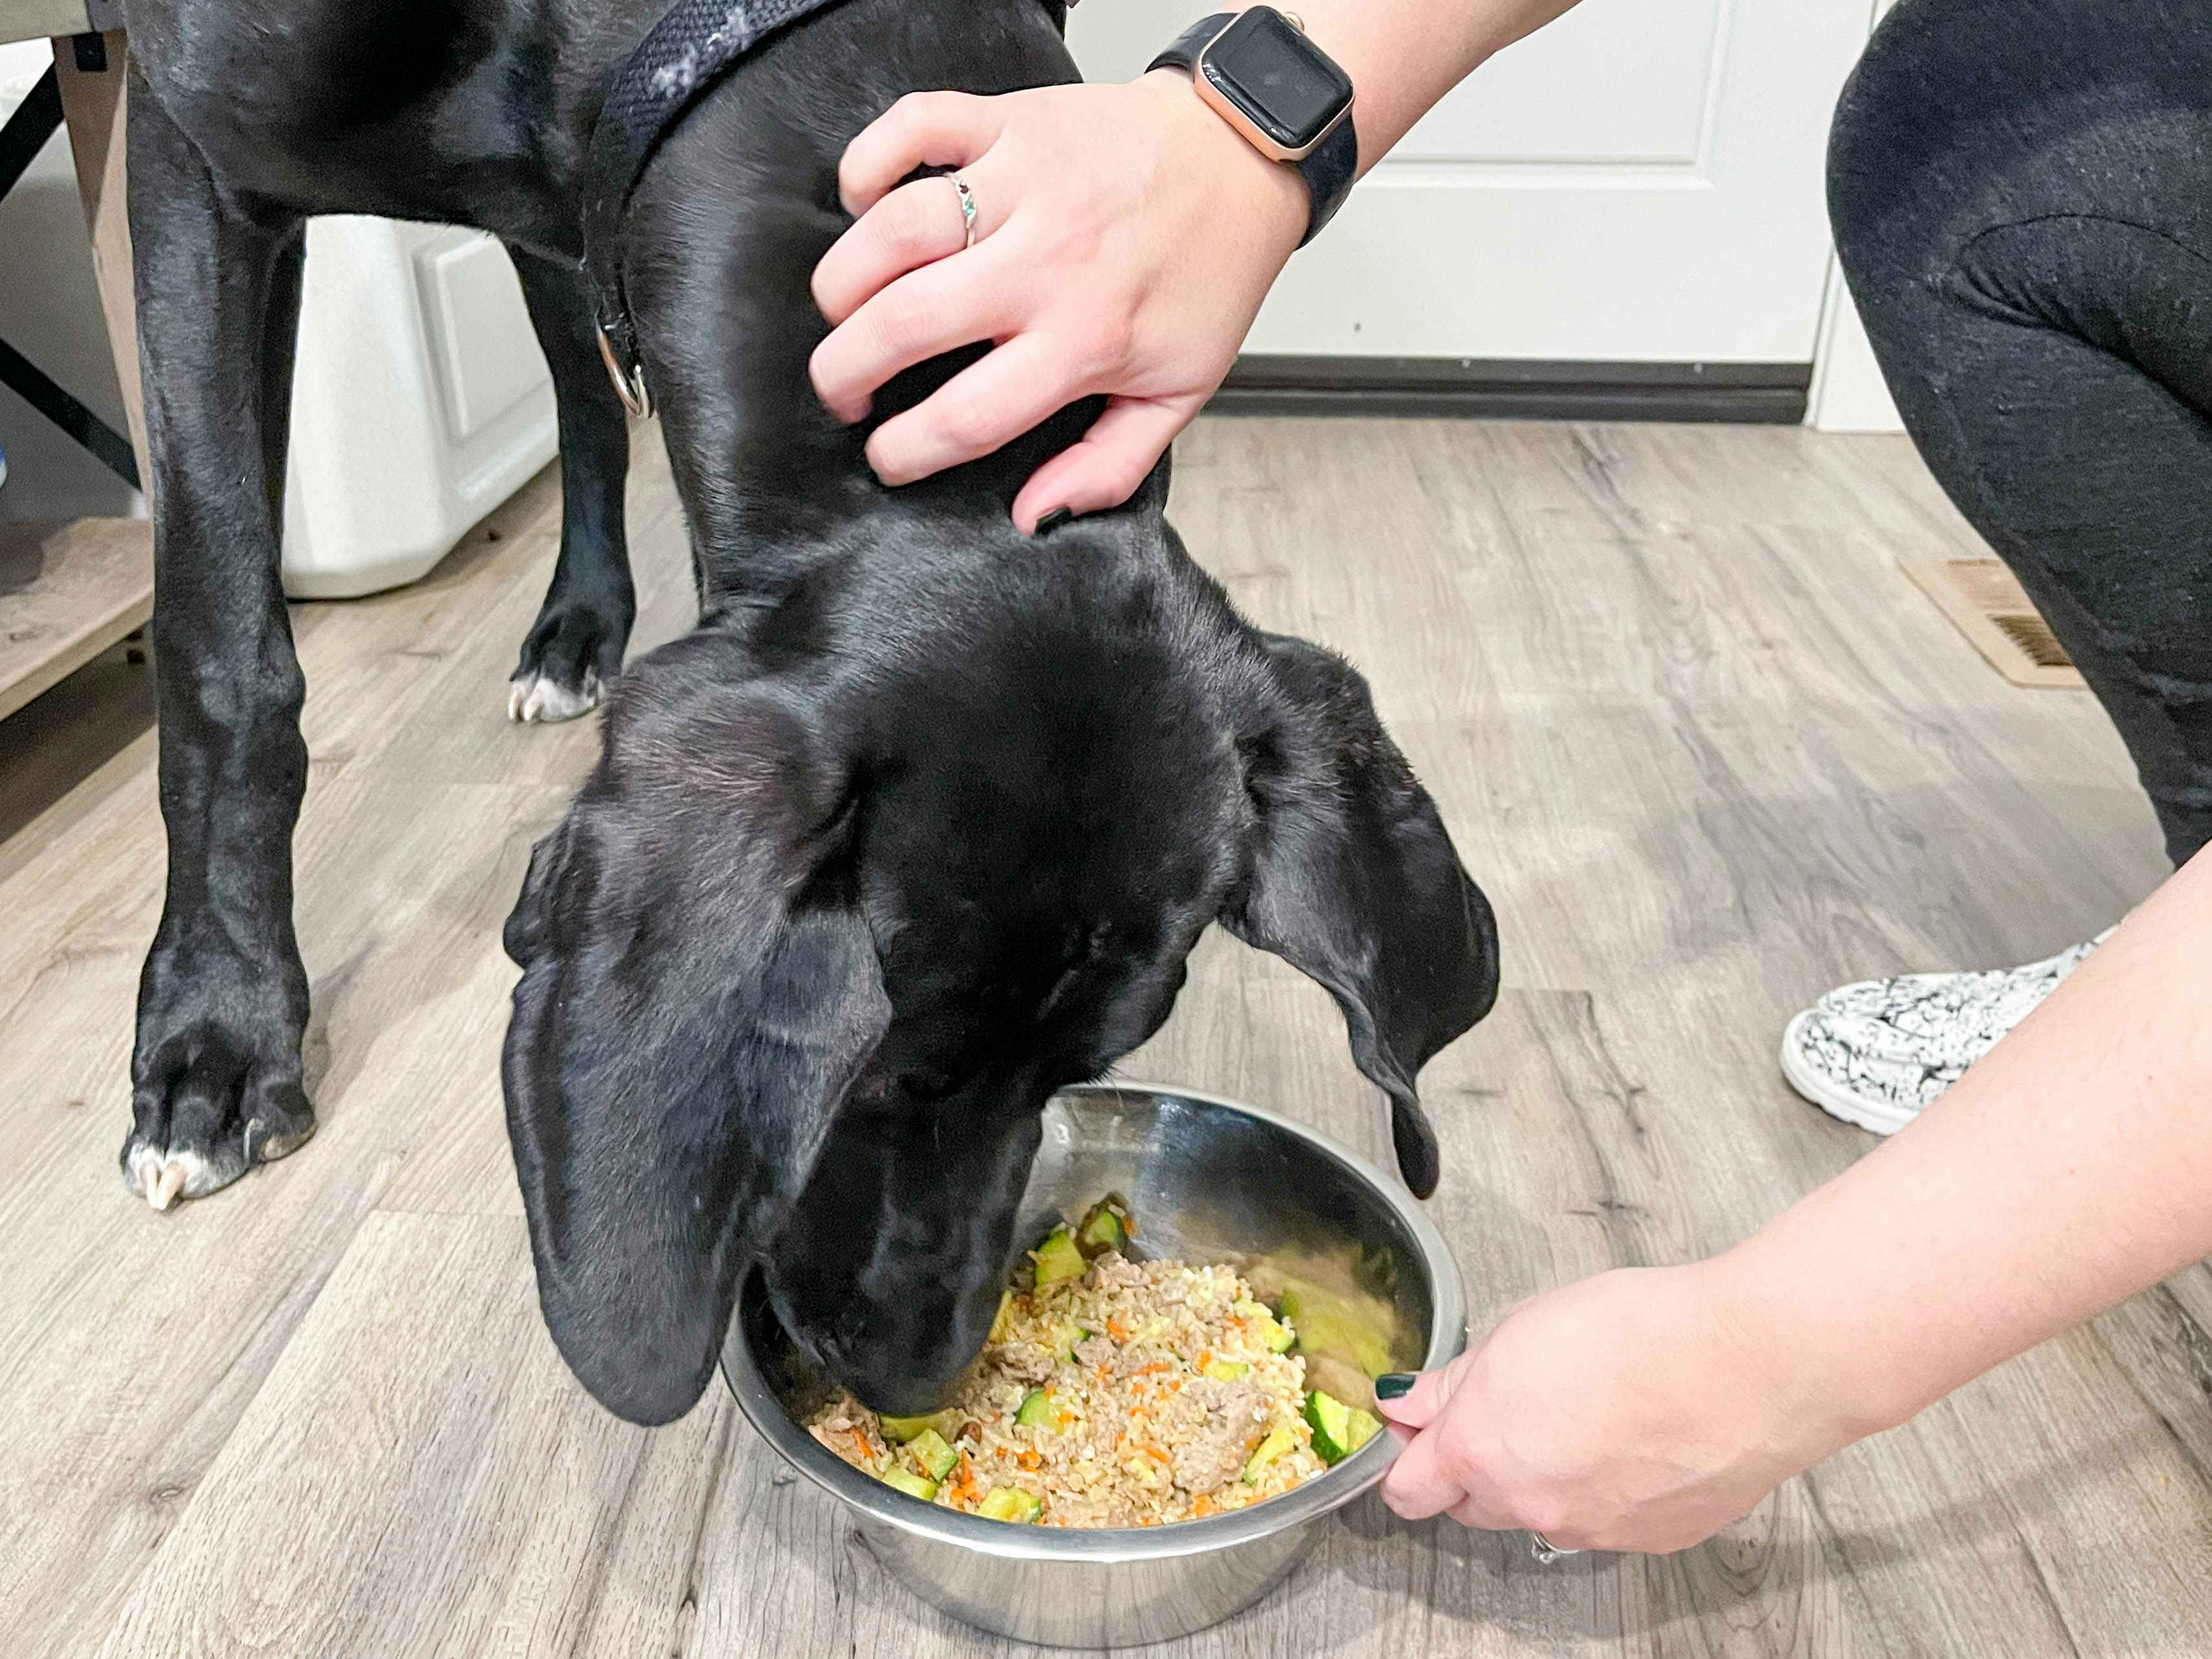 a dog eating homemade dog food from a dog bowl